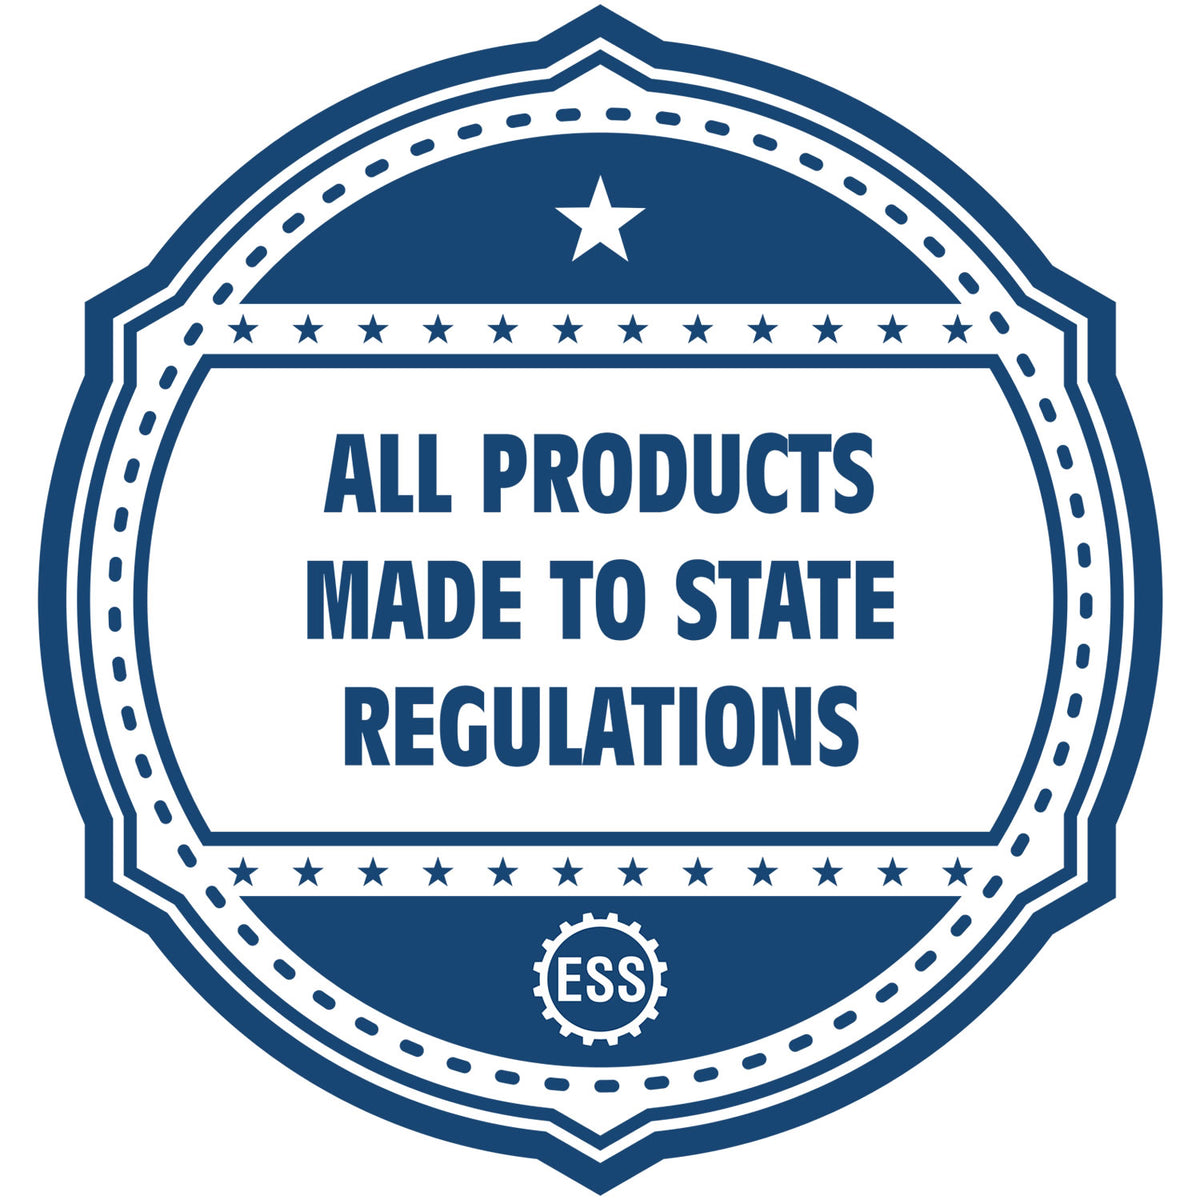 An icon or badge element for the State of Oklahoma Long Reach Architectural Embossing Seal showing that this product is made in compliance with state regulations.